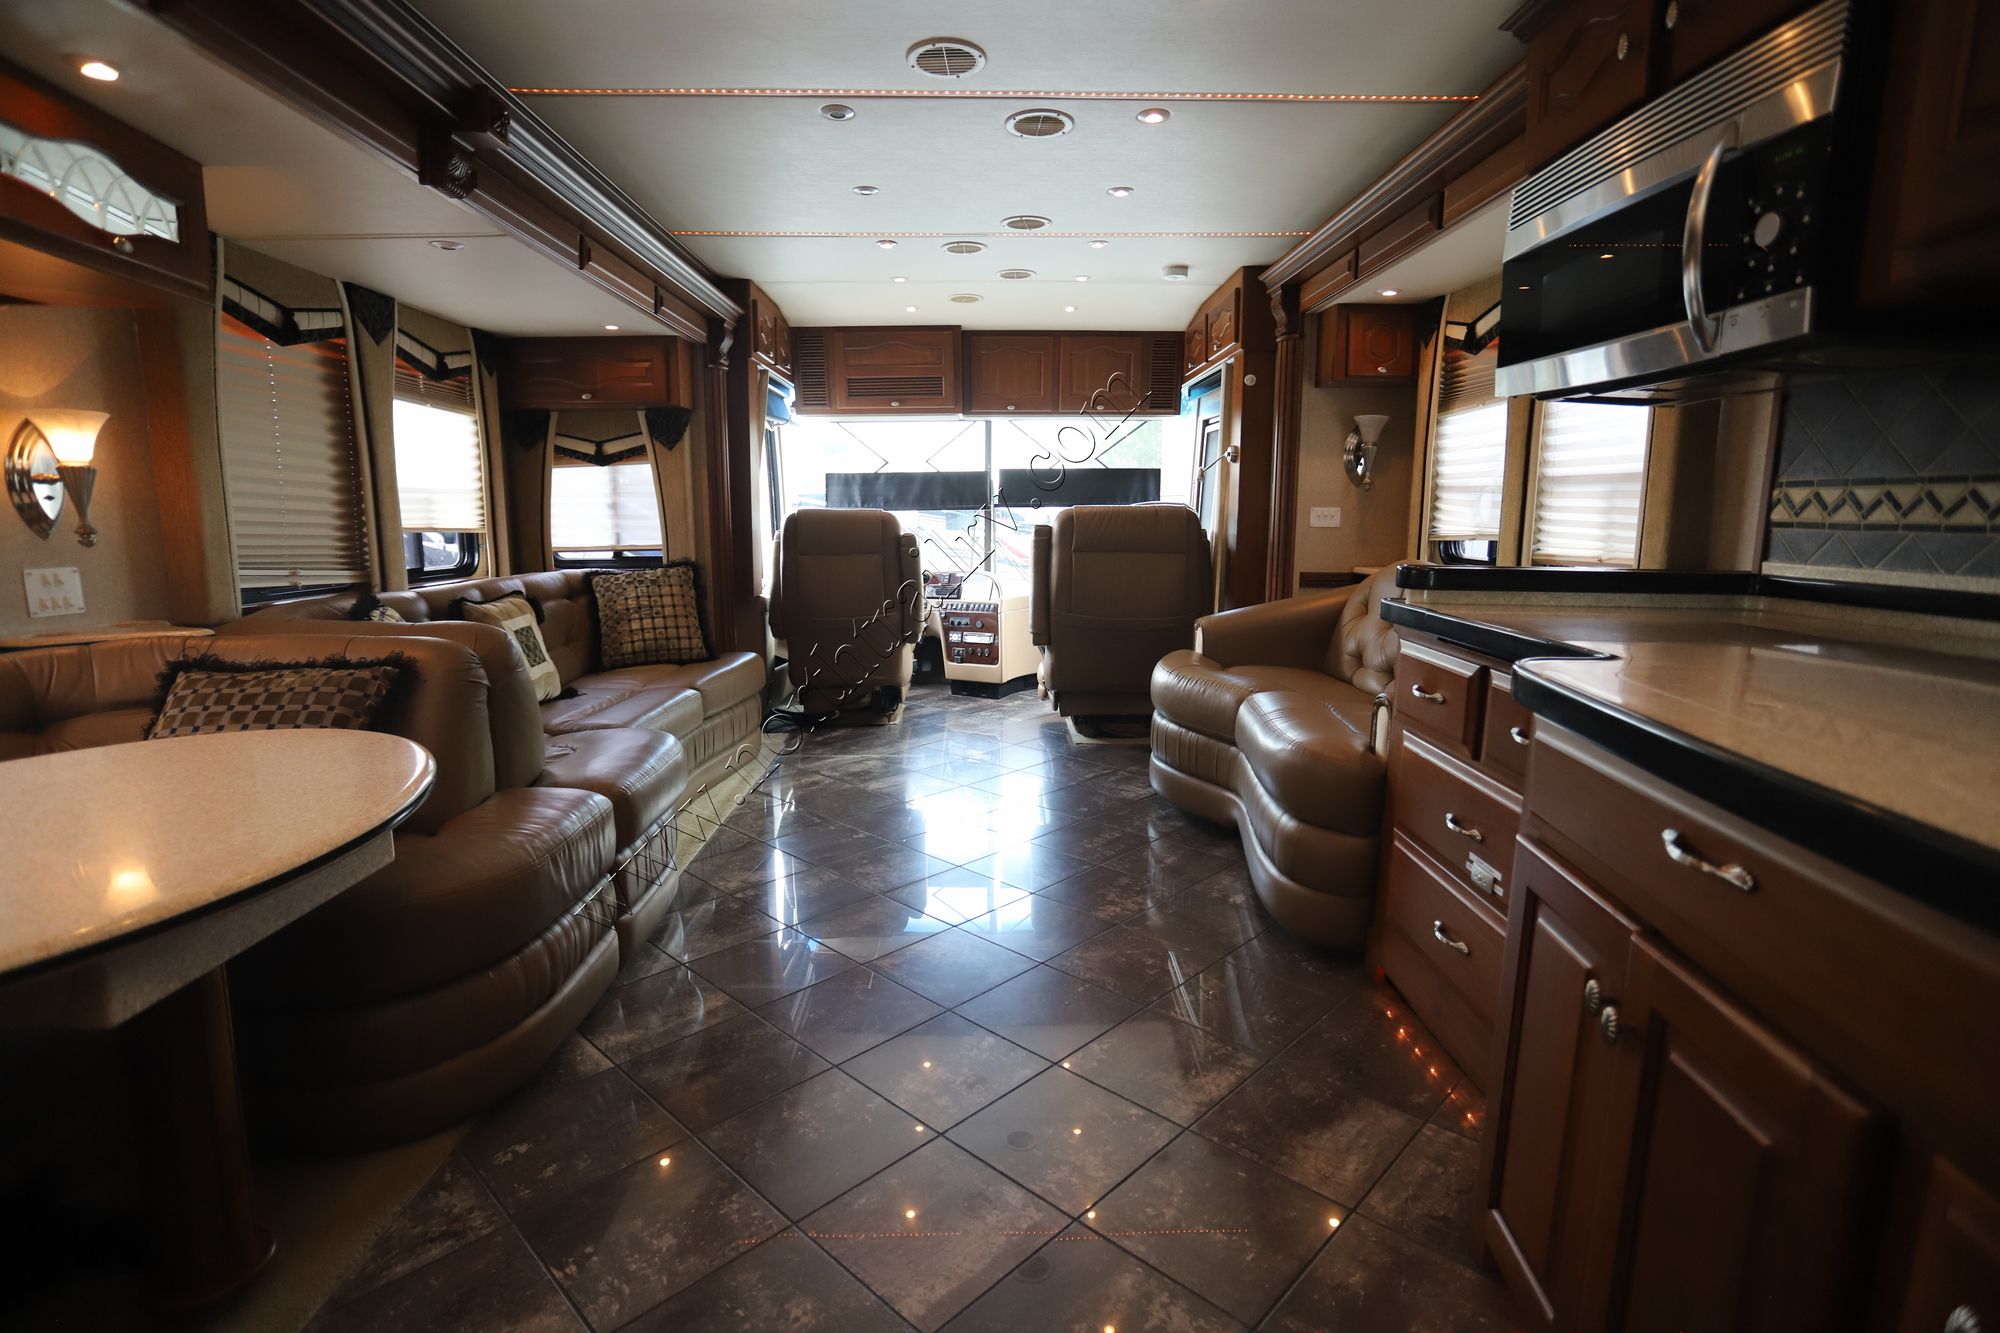 Used 2006 Newmar Essex 4508 Class A  For Sale